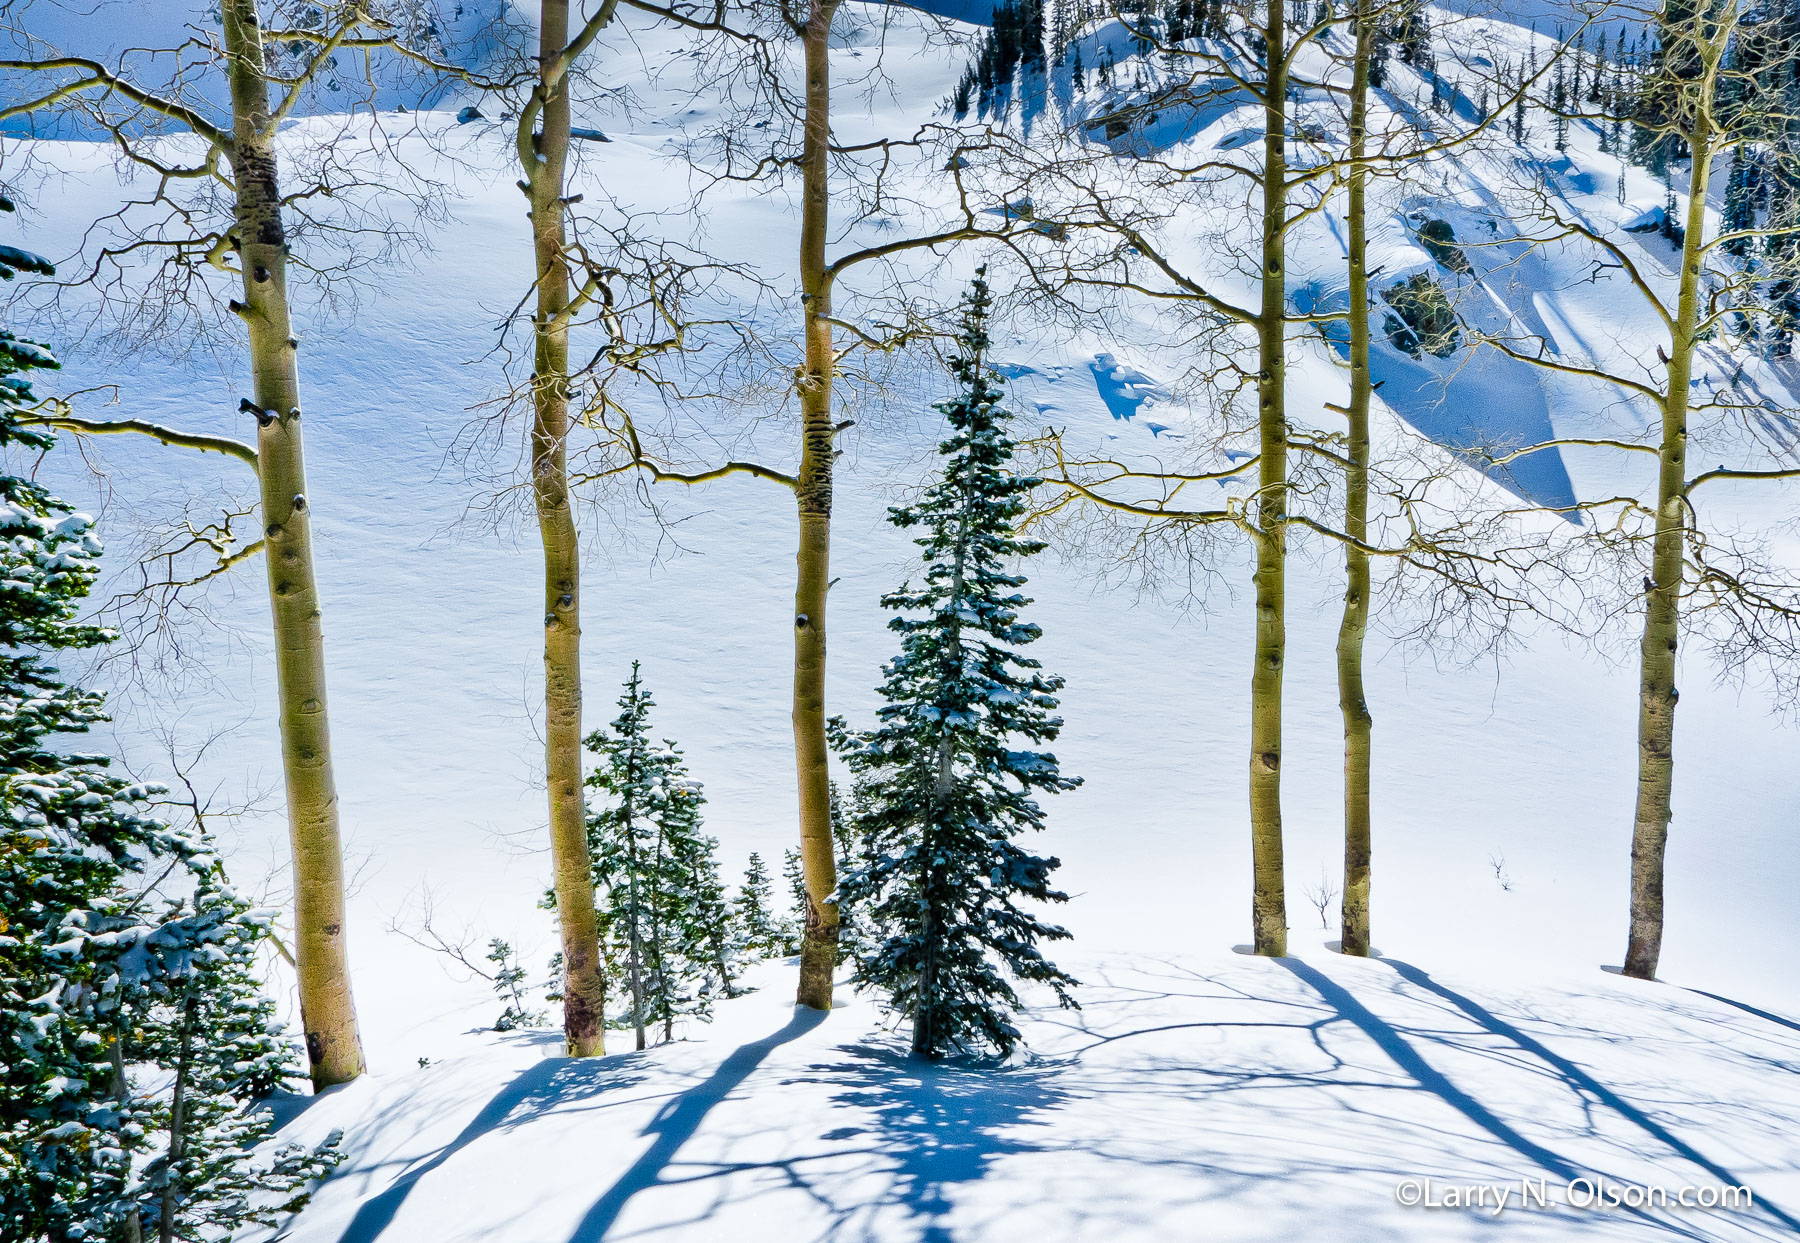 White Pine Canyon, Wasatch Mountains, Utah | A still mountain snowscape with Aspen and conifers.